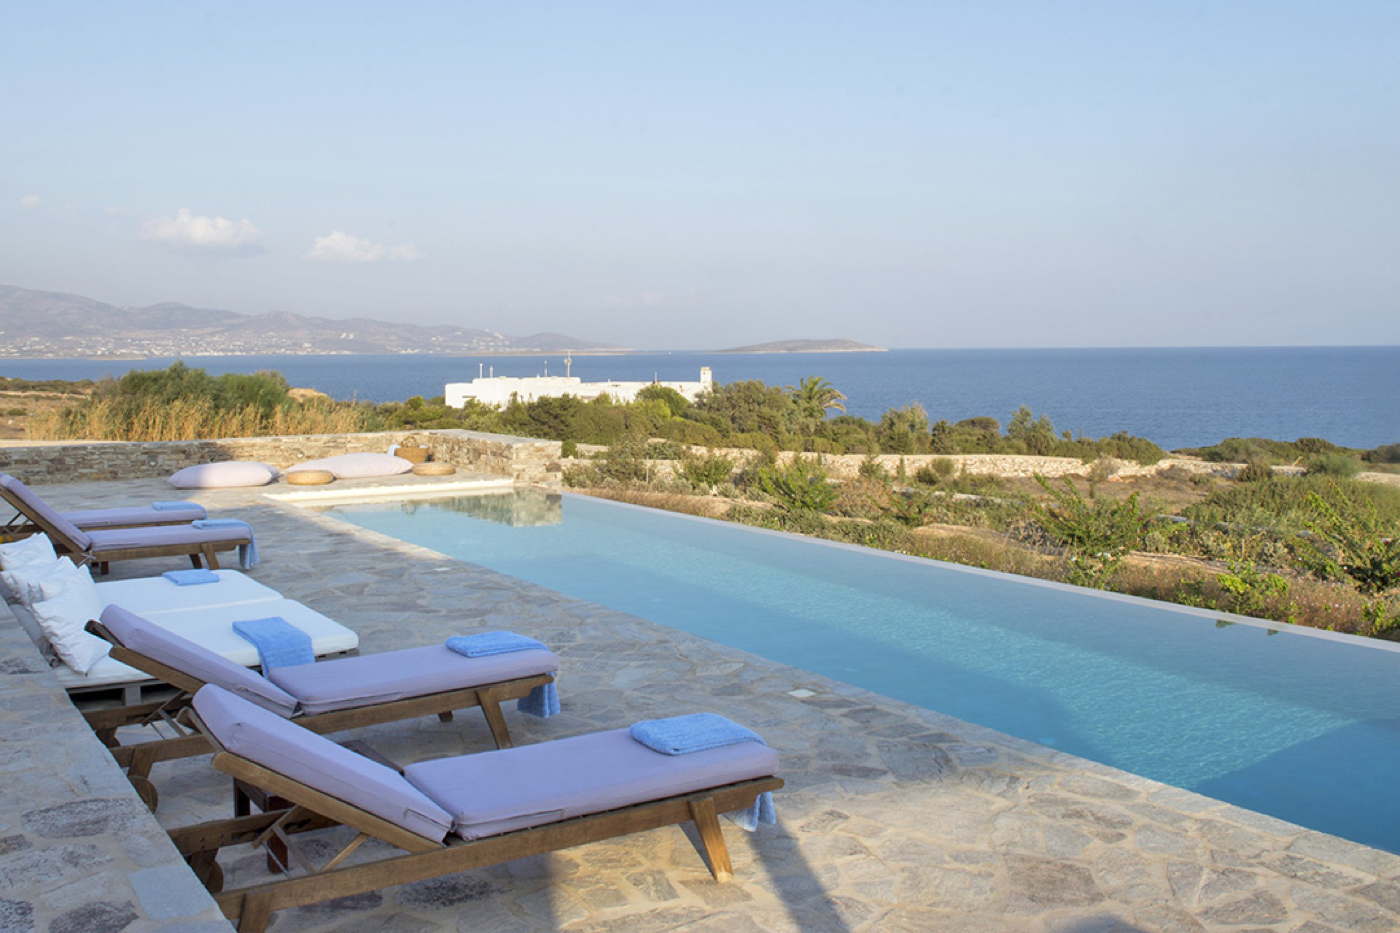 Exclusive holiday rental villa with staff in Antiparos Greece